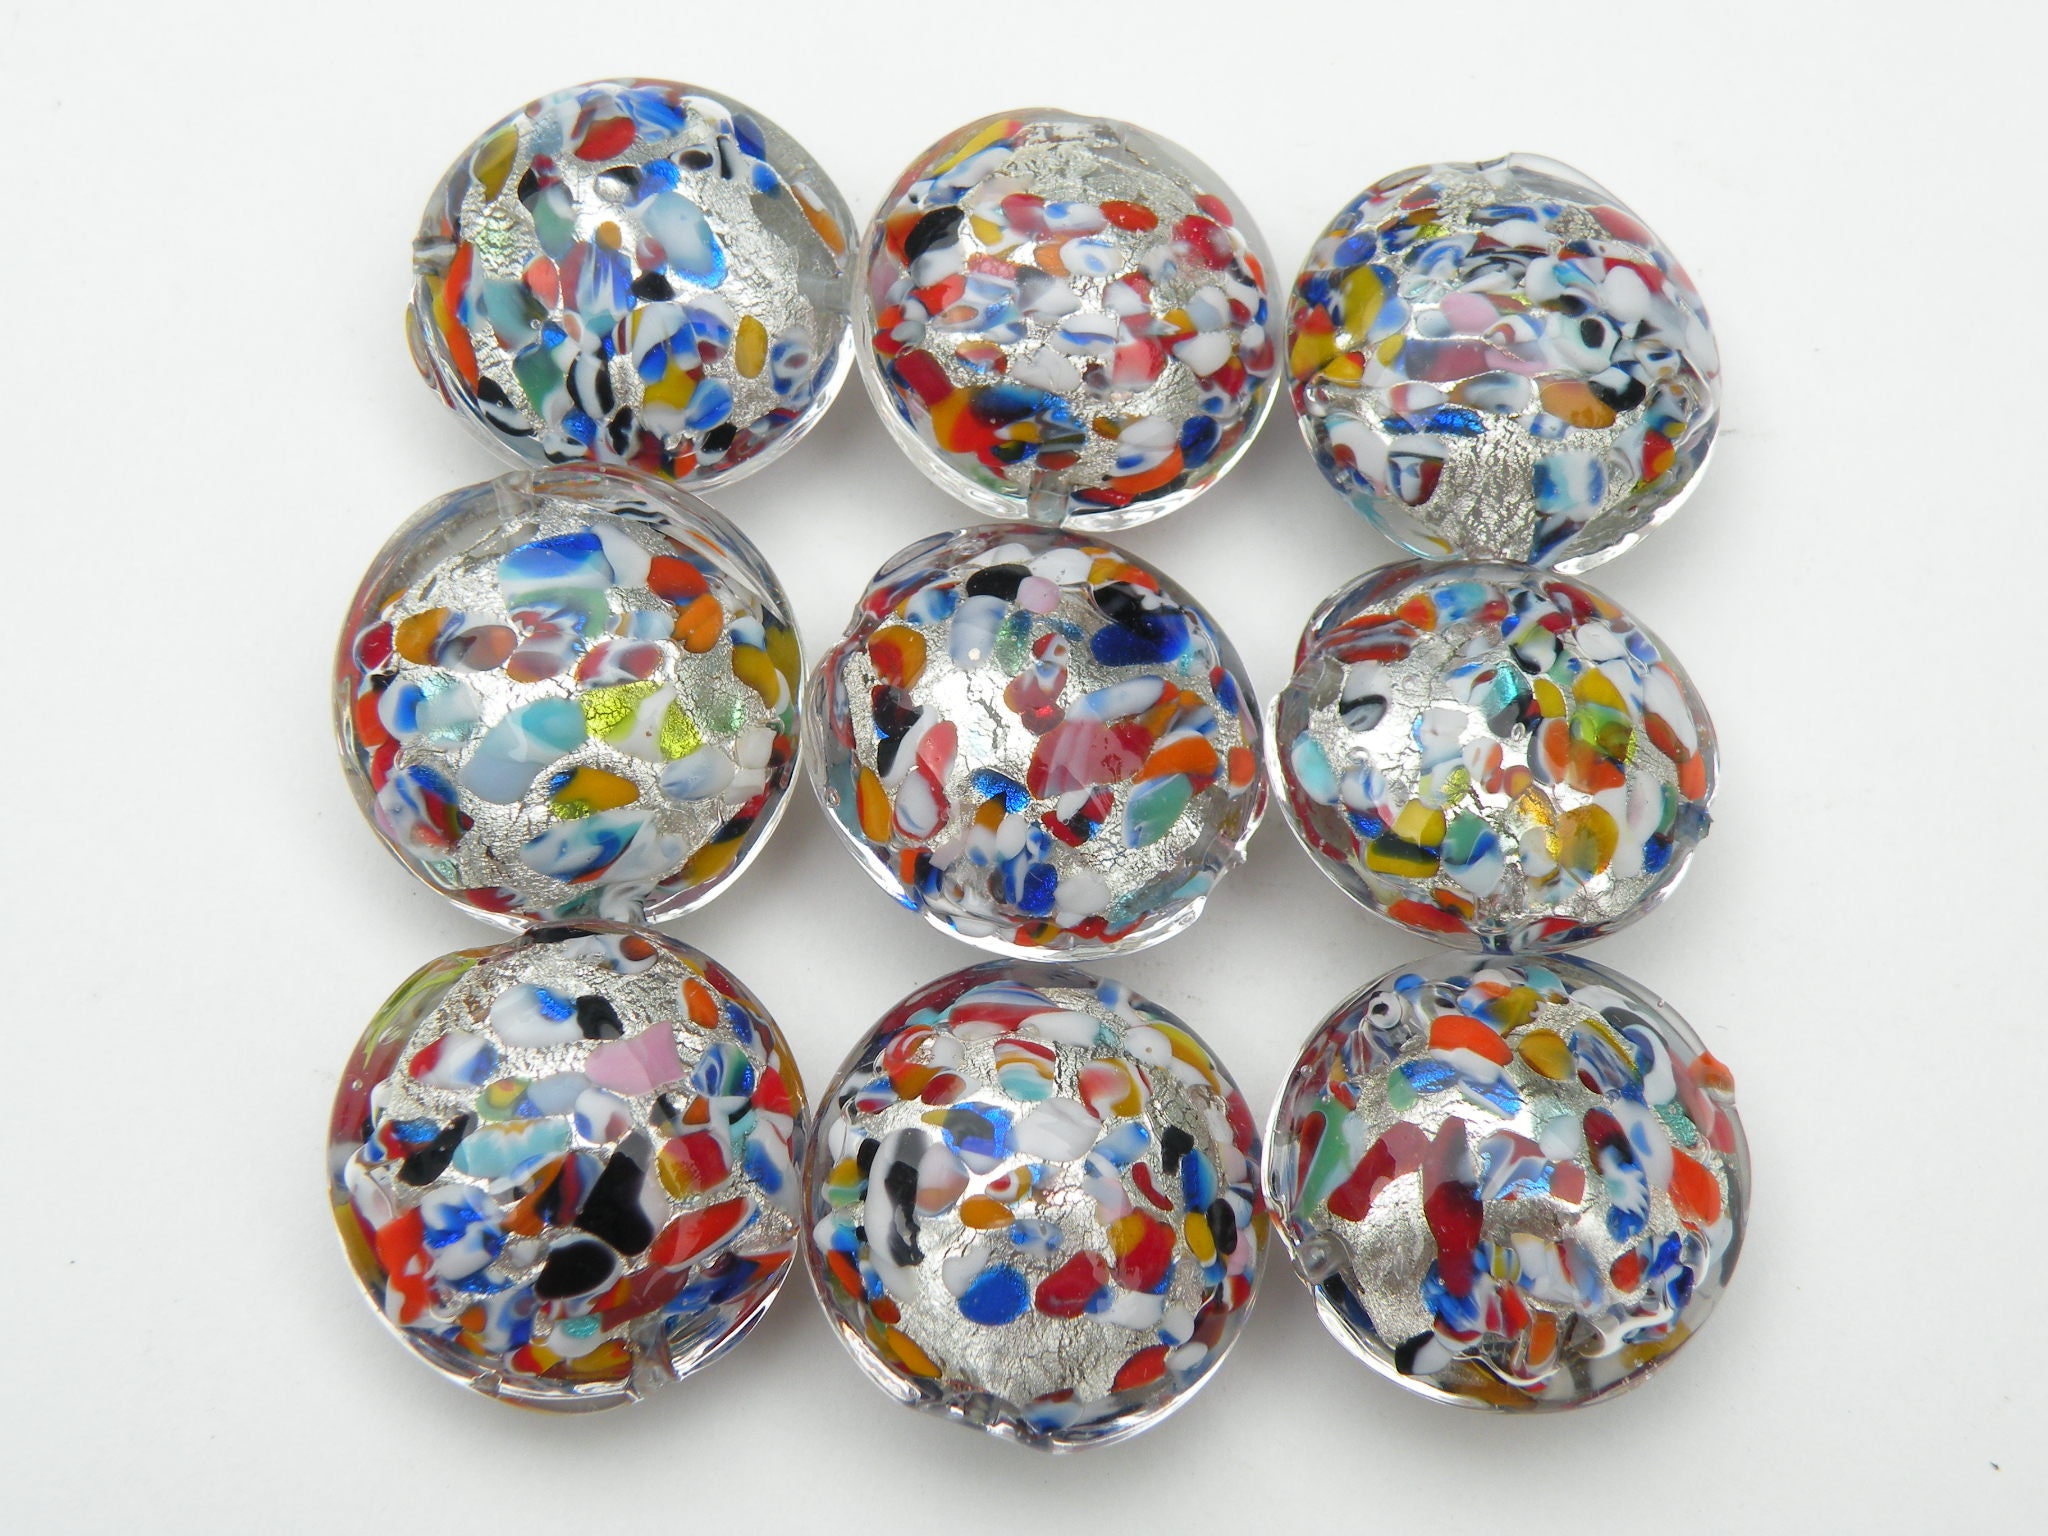 White Gold Beads 14mm Round Ball Murano Glass Bead in Multicolor Venetian  Bead Klimt Style Bead for Craft Jewelry 